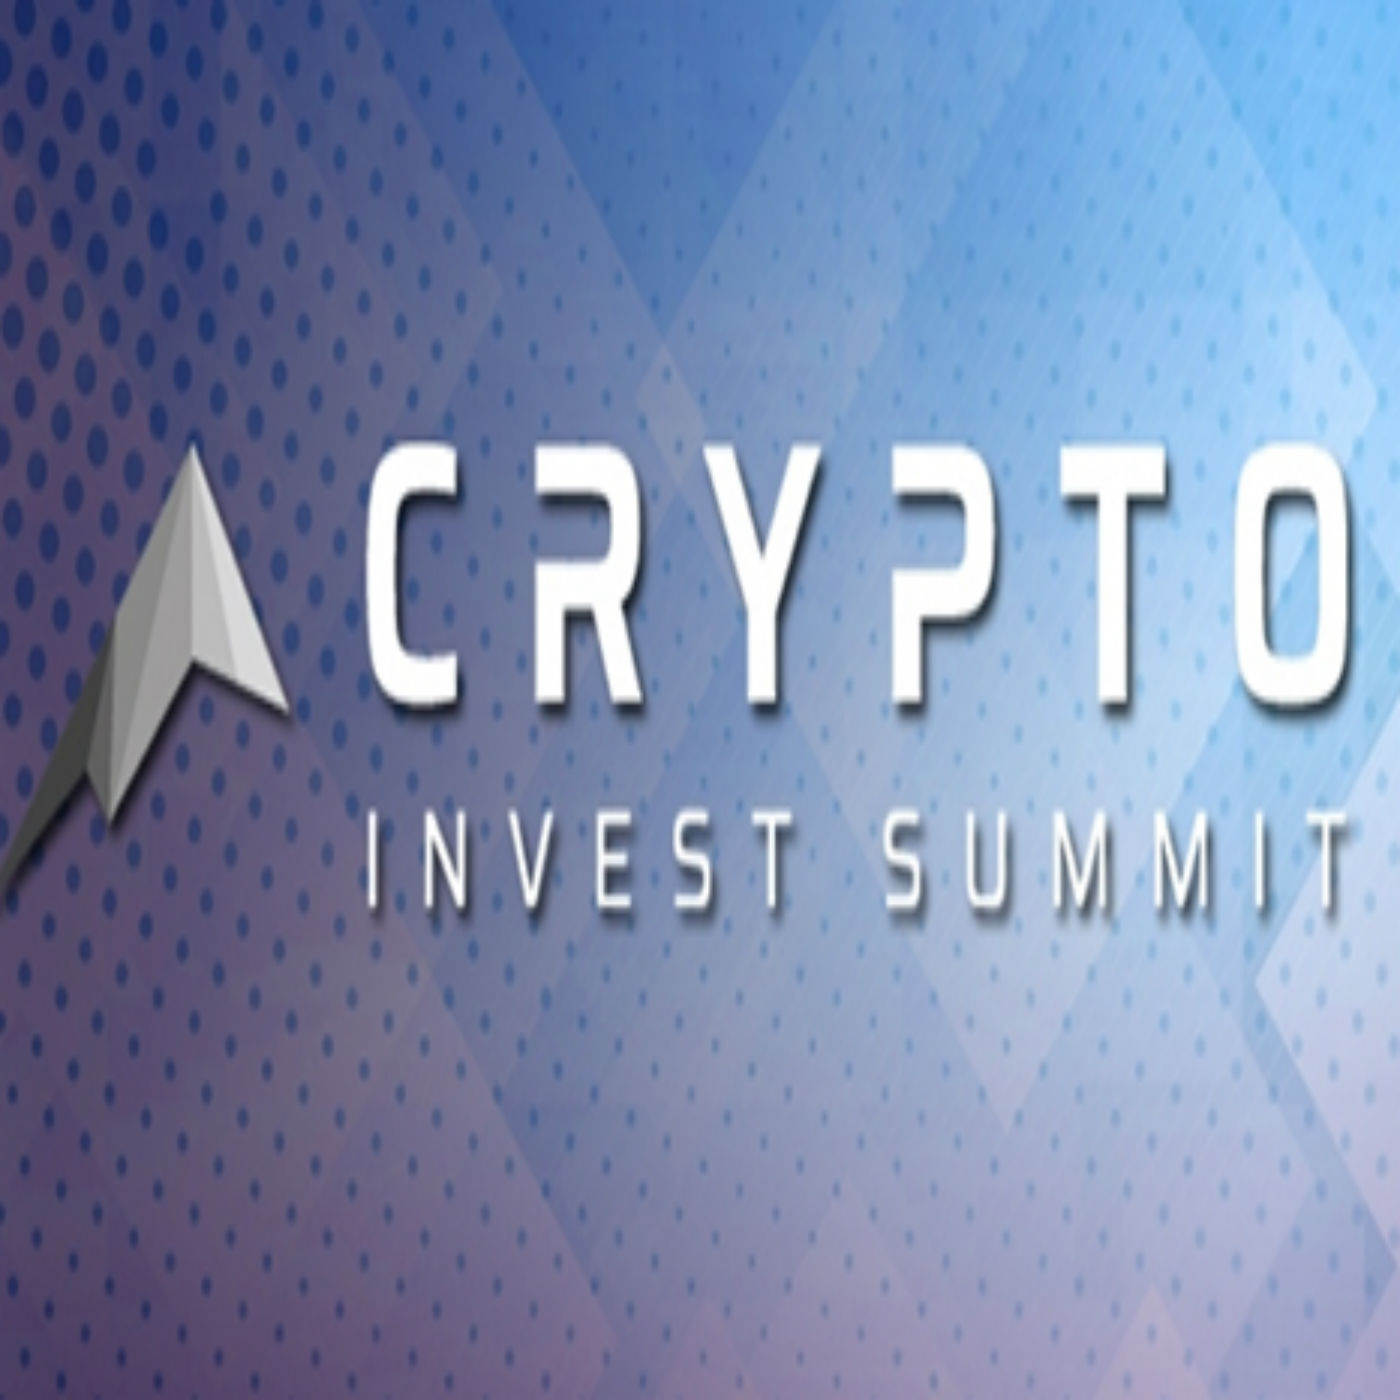 Crypto funding summit nyc forex trading for dummies 2022 movies